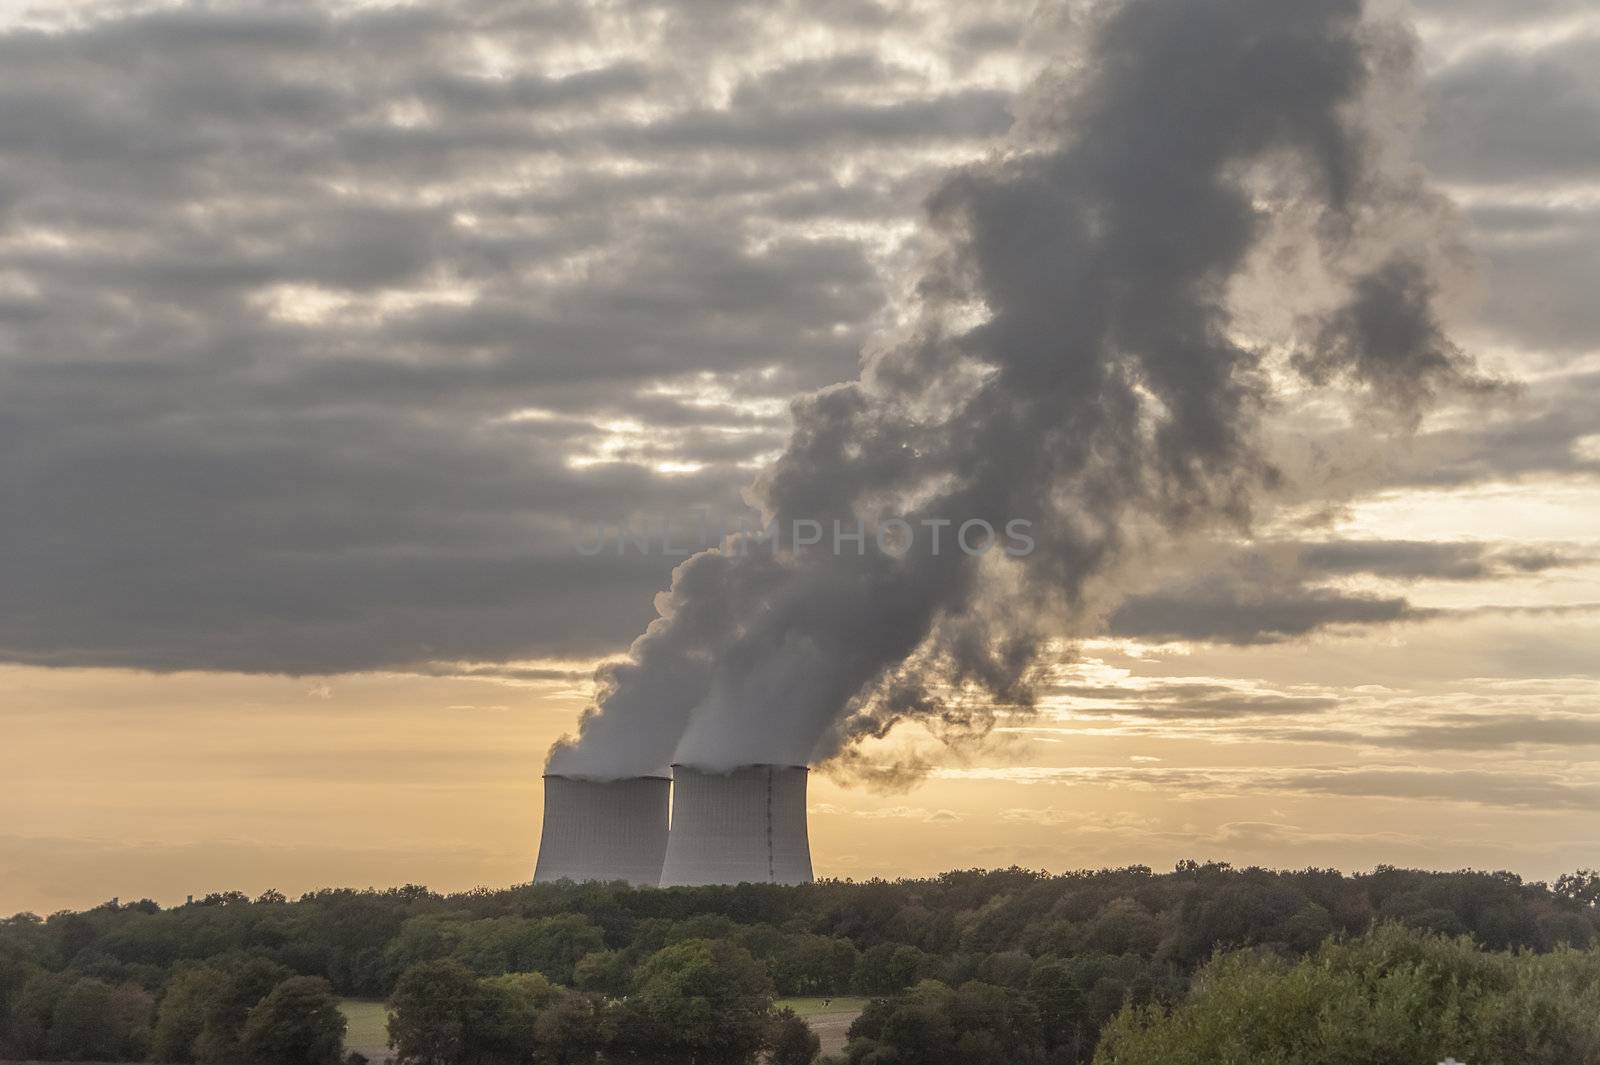 Nuclear power plant by f/2sumicron